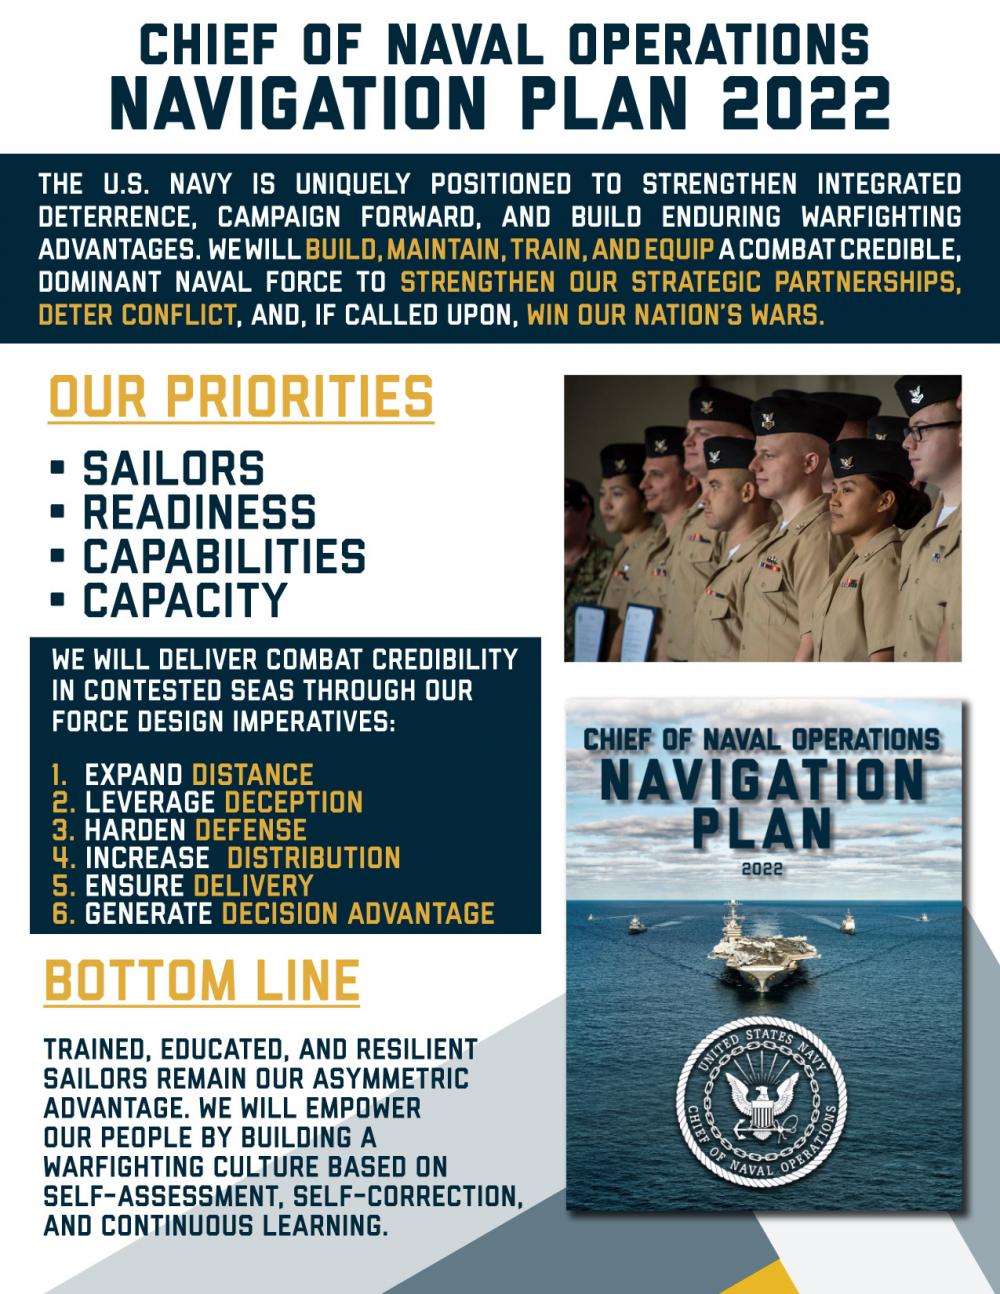 Chief of Naval Operations Navigation Plan 2022